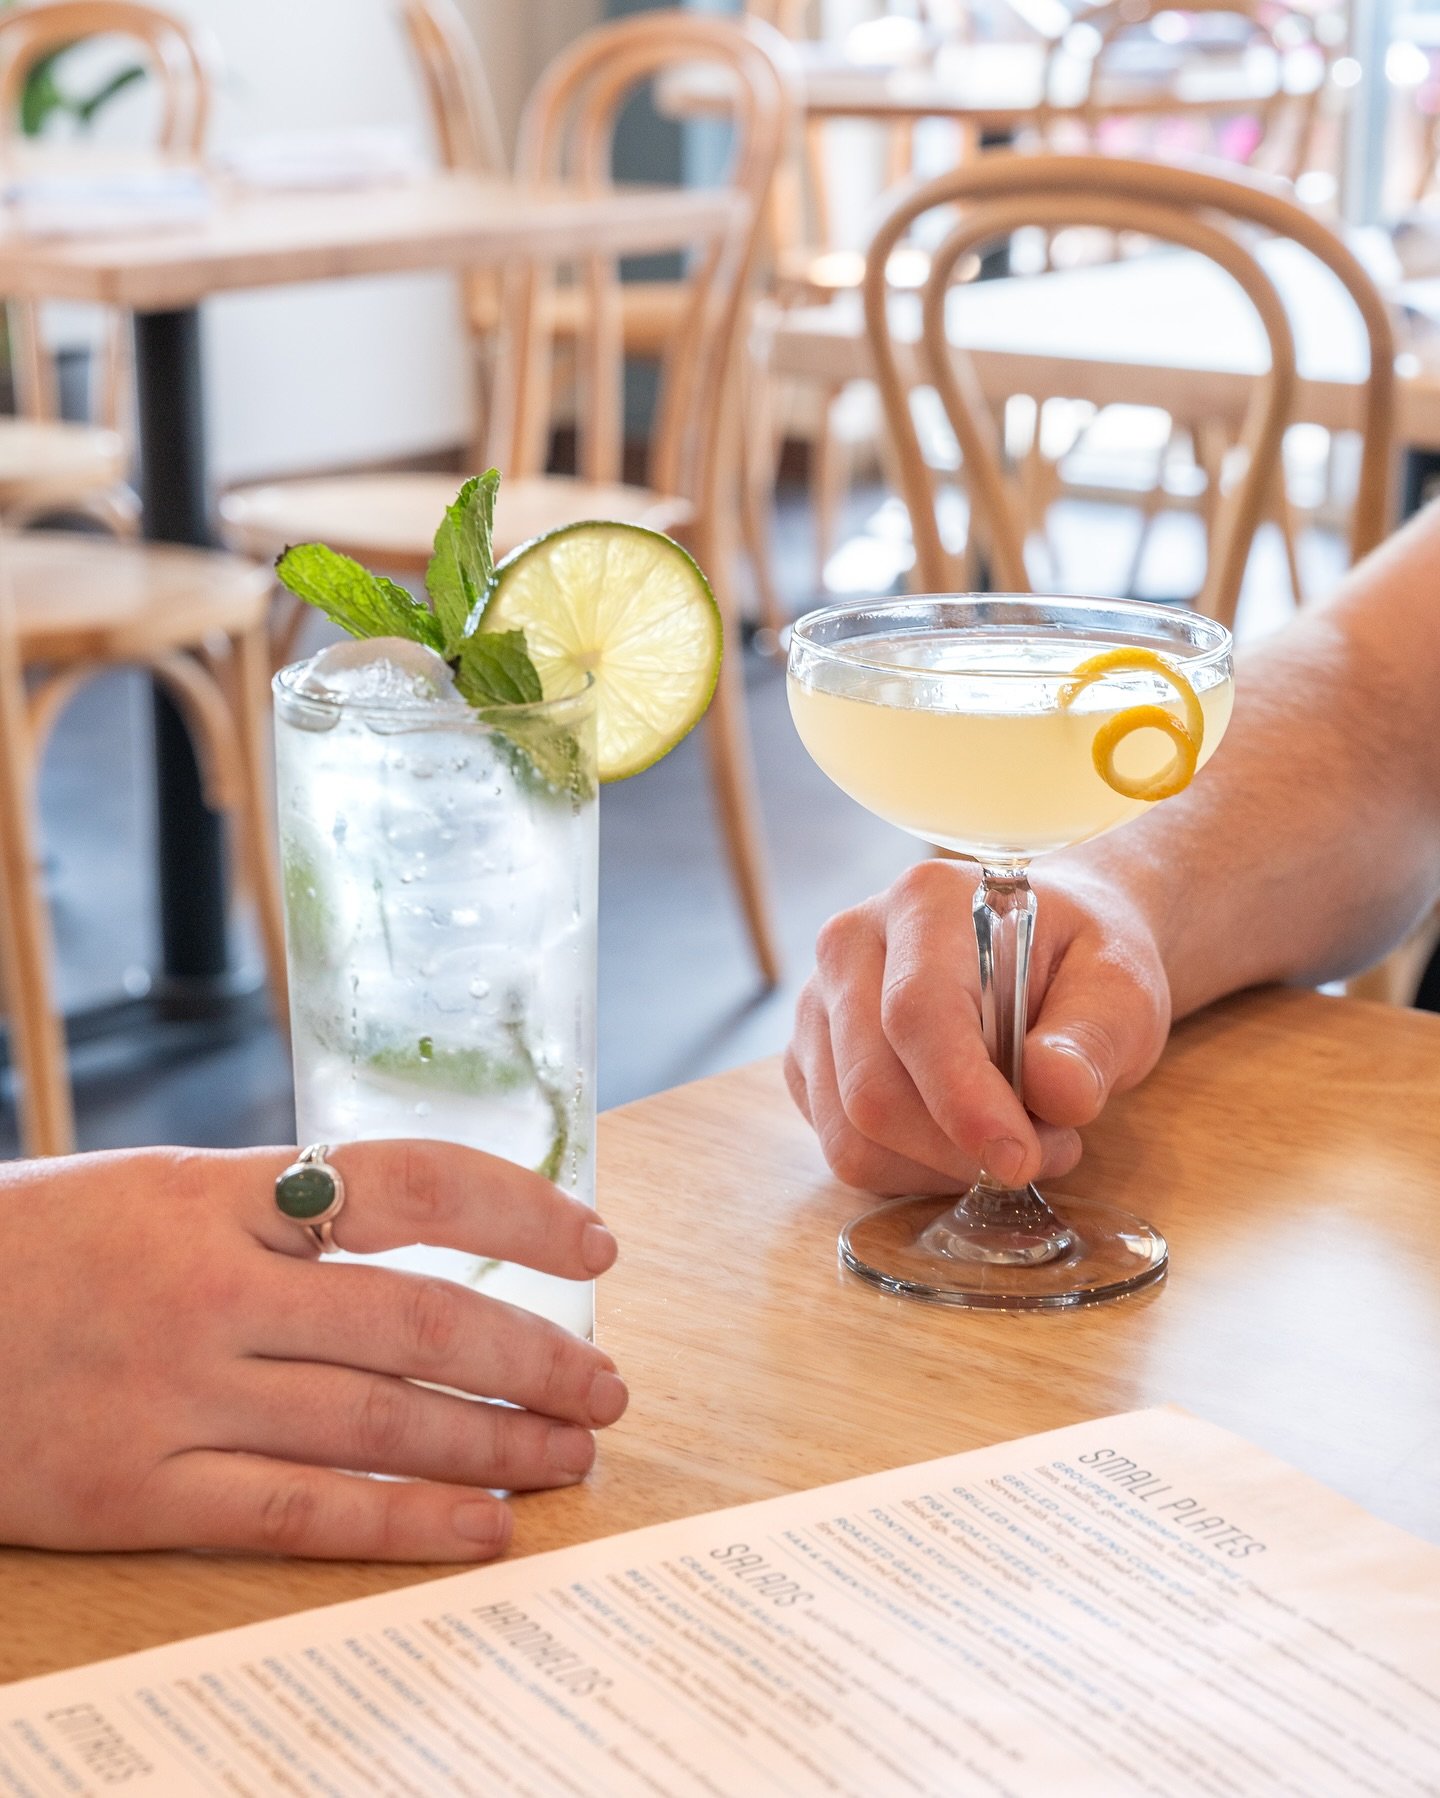 Joining us for our NEW Daily Happy Hour? Enjoy refreshing cocktails like the classic French 75 and Mojitos for a great low price on this beautiful spring day. Cocktails, Beer, Wine, AND appetizers are on special from 3pm-6pm, every Tuesday through Su